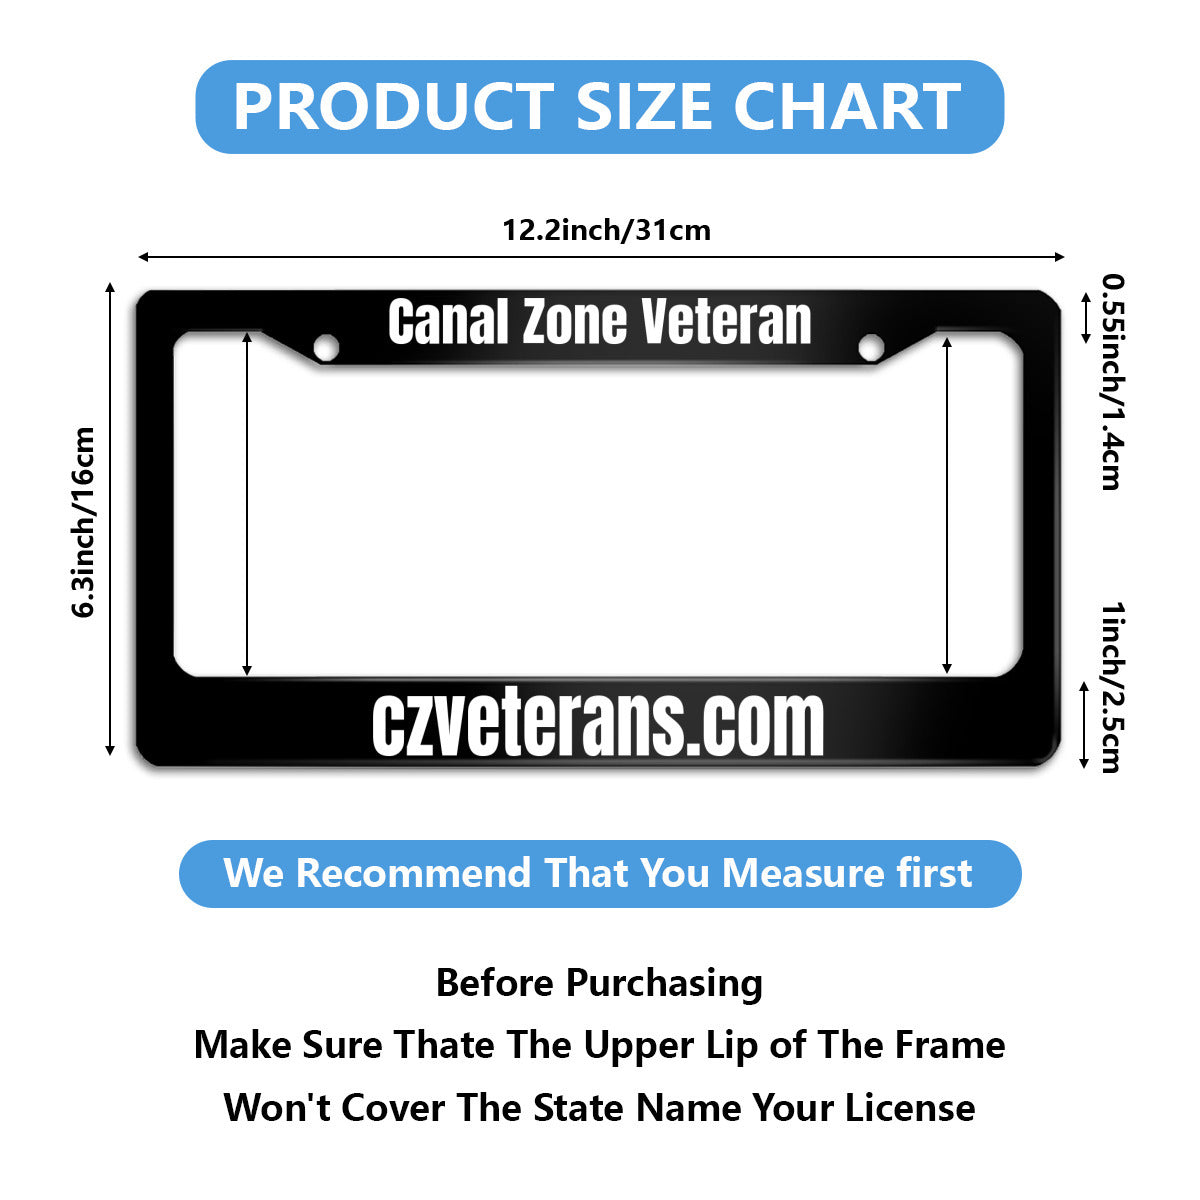 Standard 2-hole U.S. License plate frame cover - SHIPPING INCLUDED